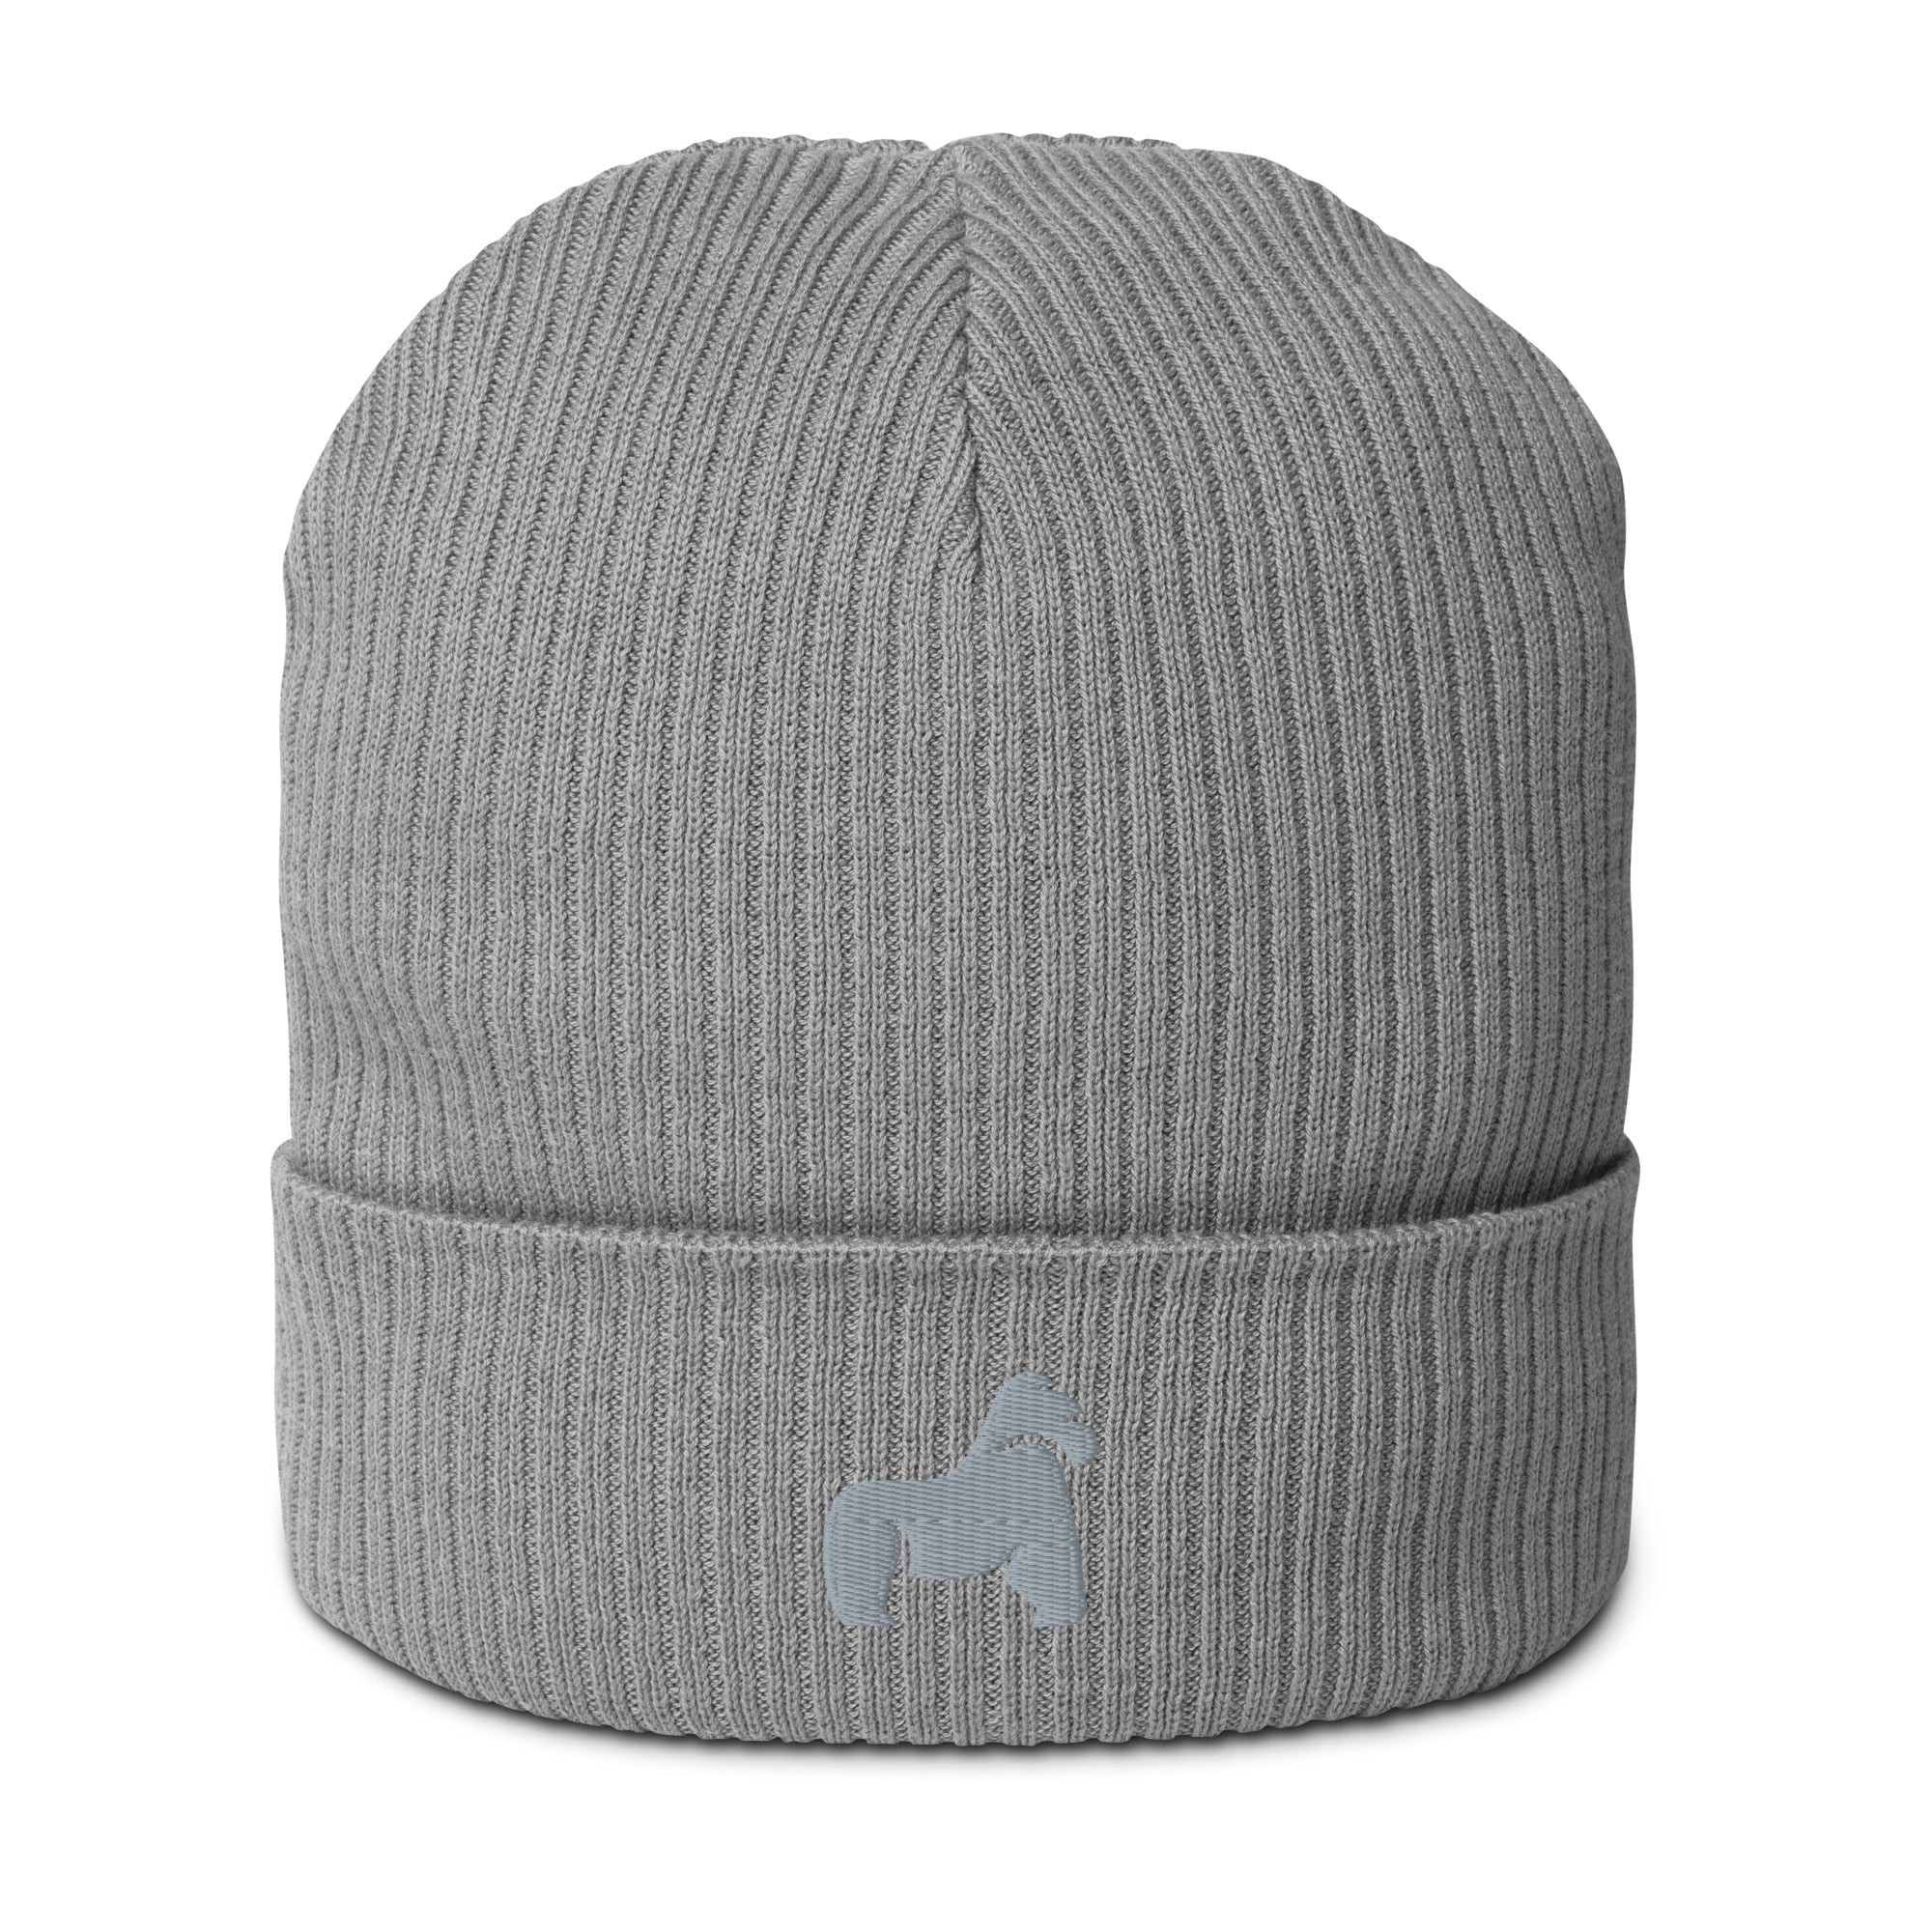 Gorilla Beanie Ribbed hat made from organic cotton